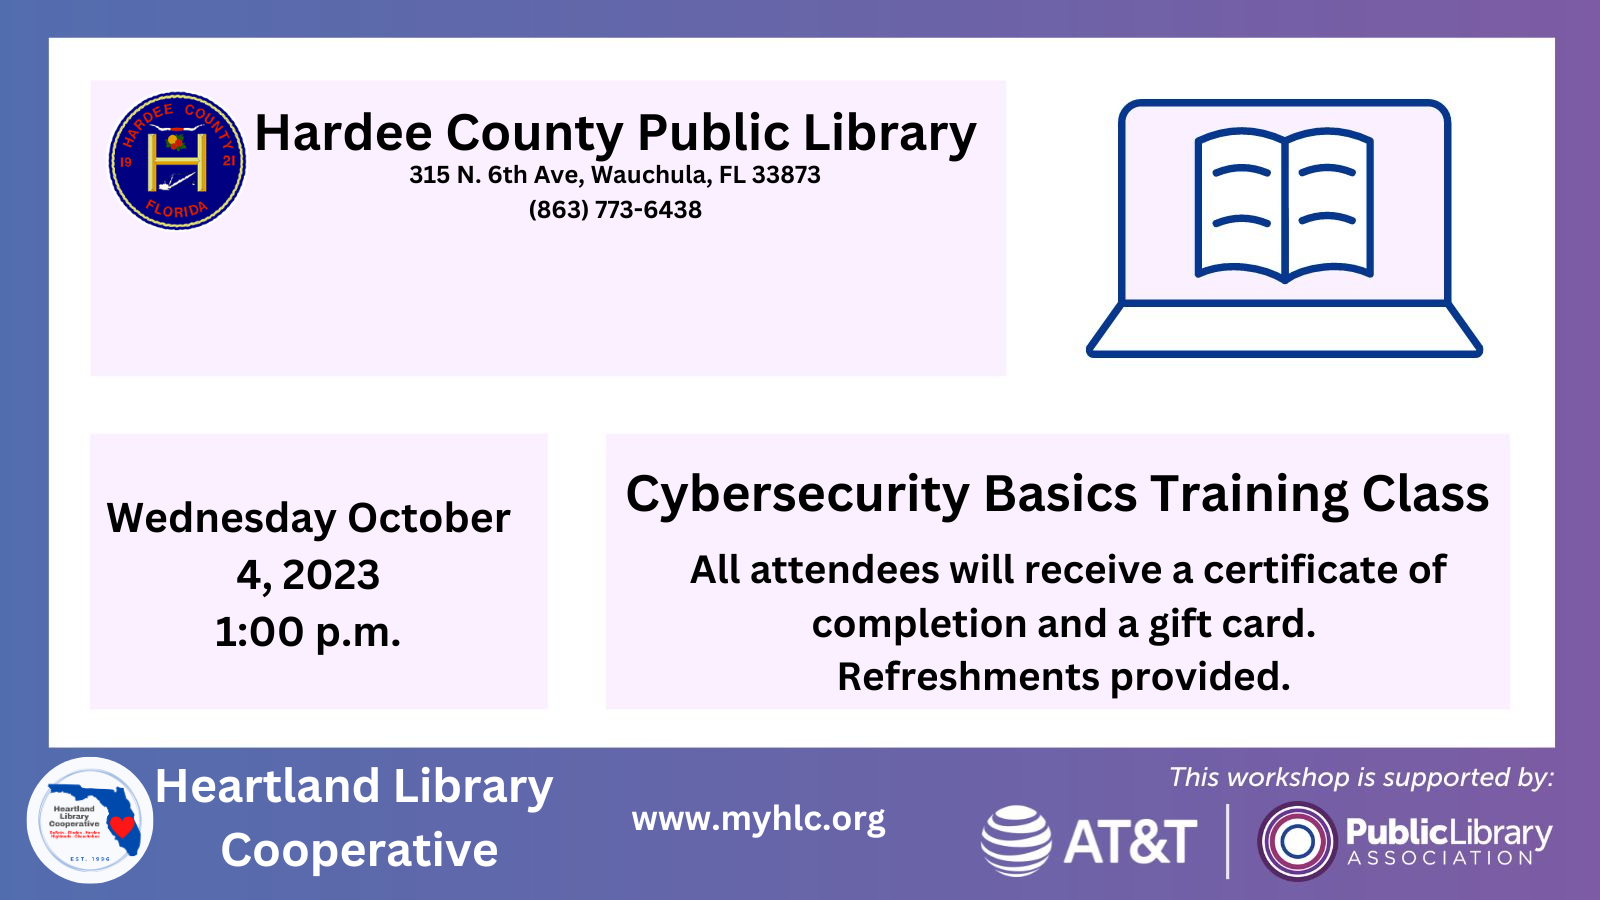 On Wednesday, October 4, 2023 at 1 p.m., the Hardee County Public Library will host a Cybersecurity basics course.